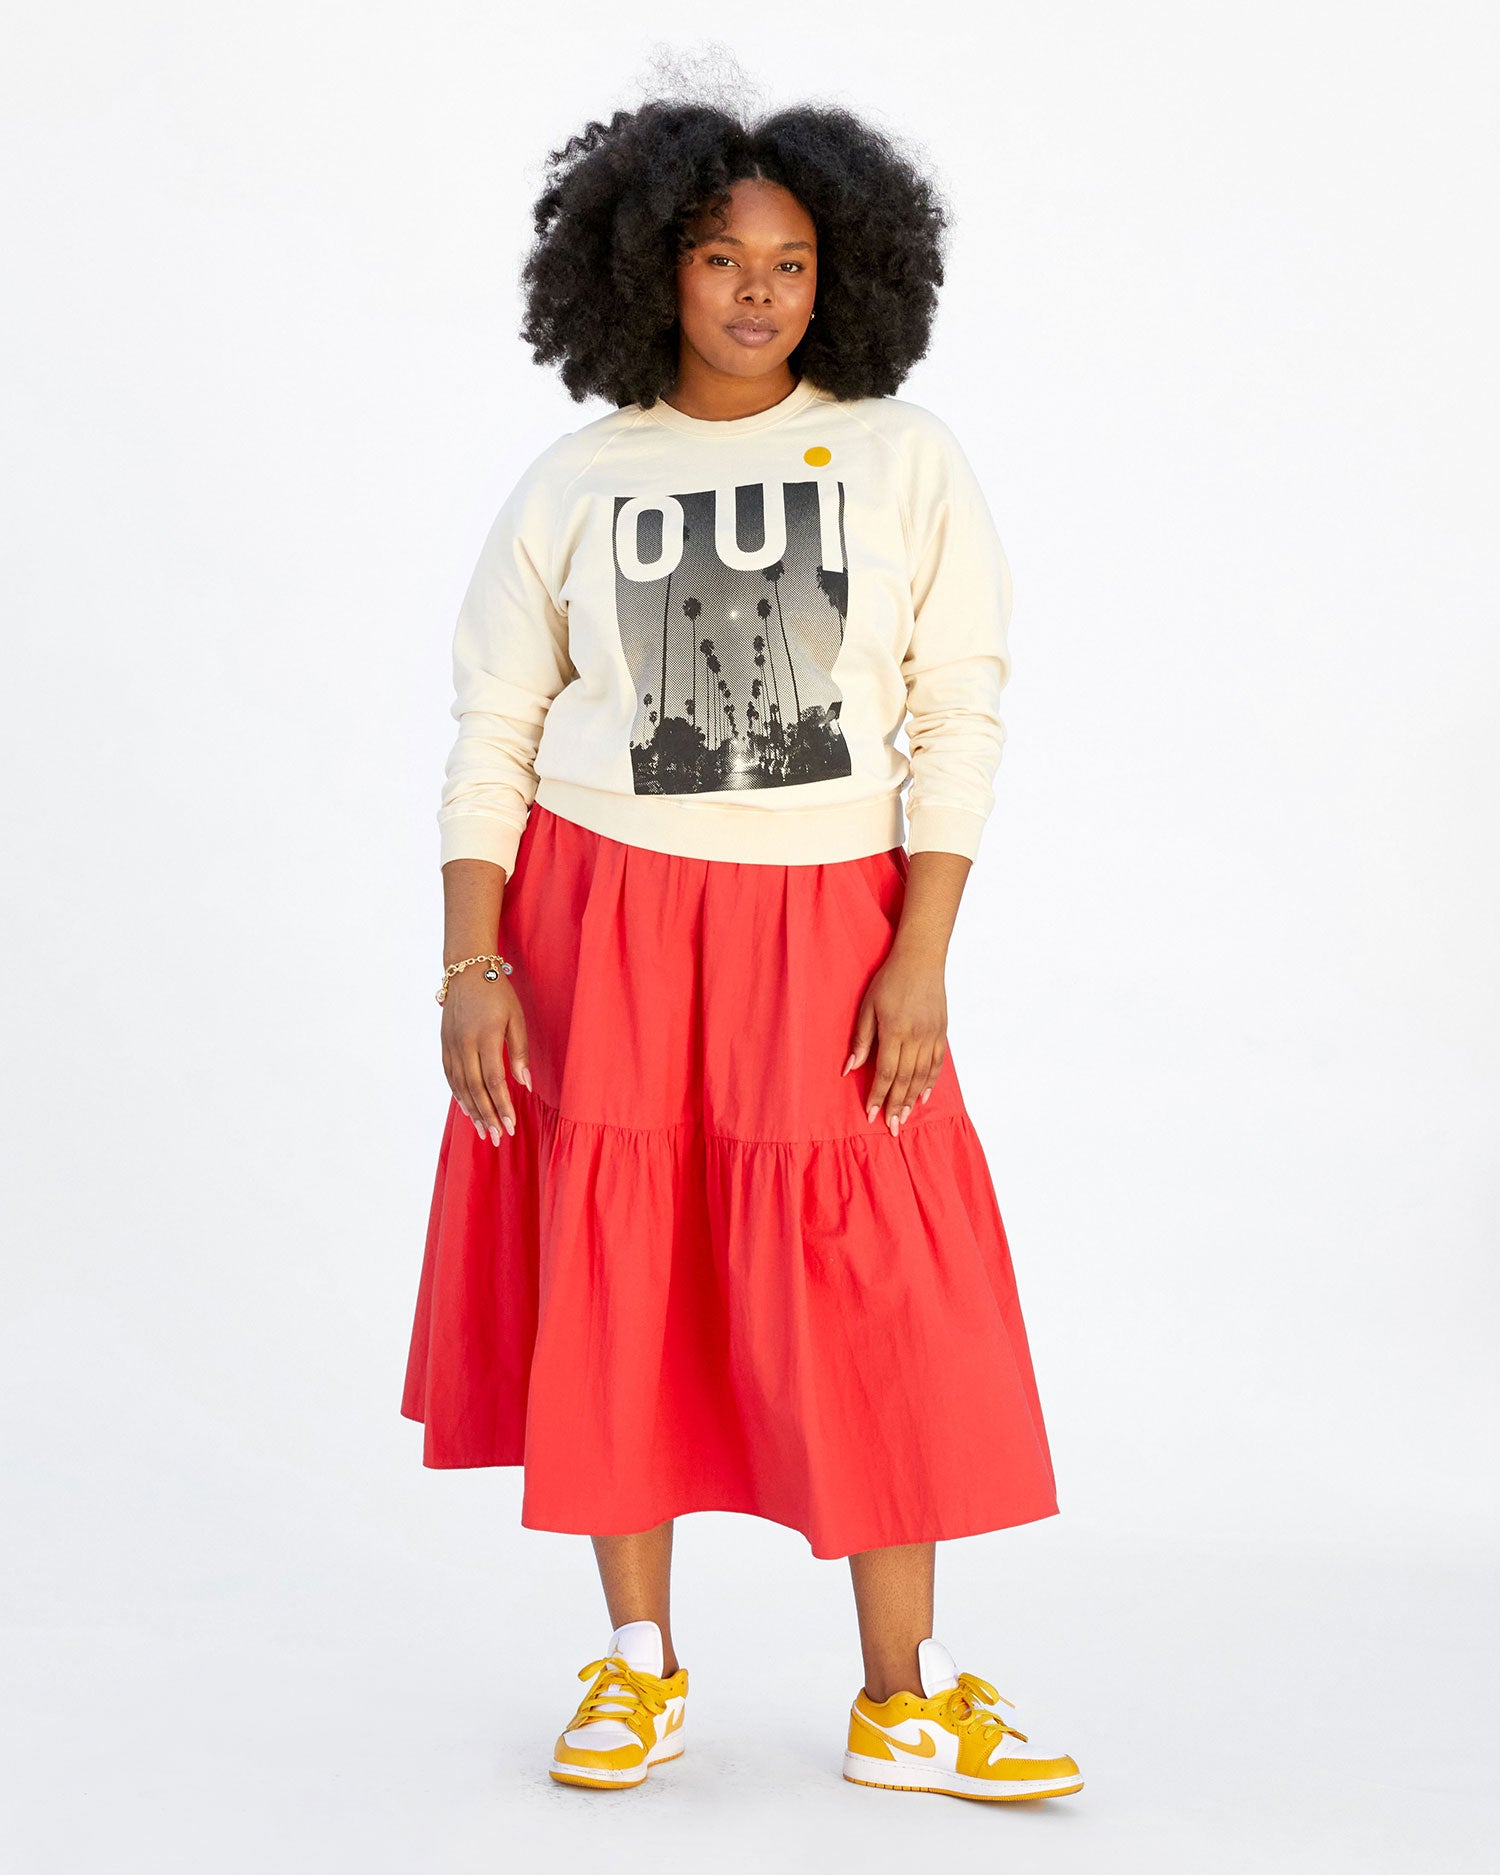 candice wearing the Cream Oui Sweatshirt with a midi length orange tiered skirt and yellow jordans